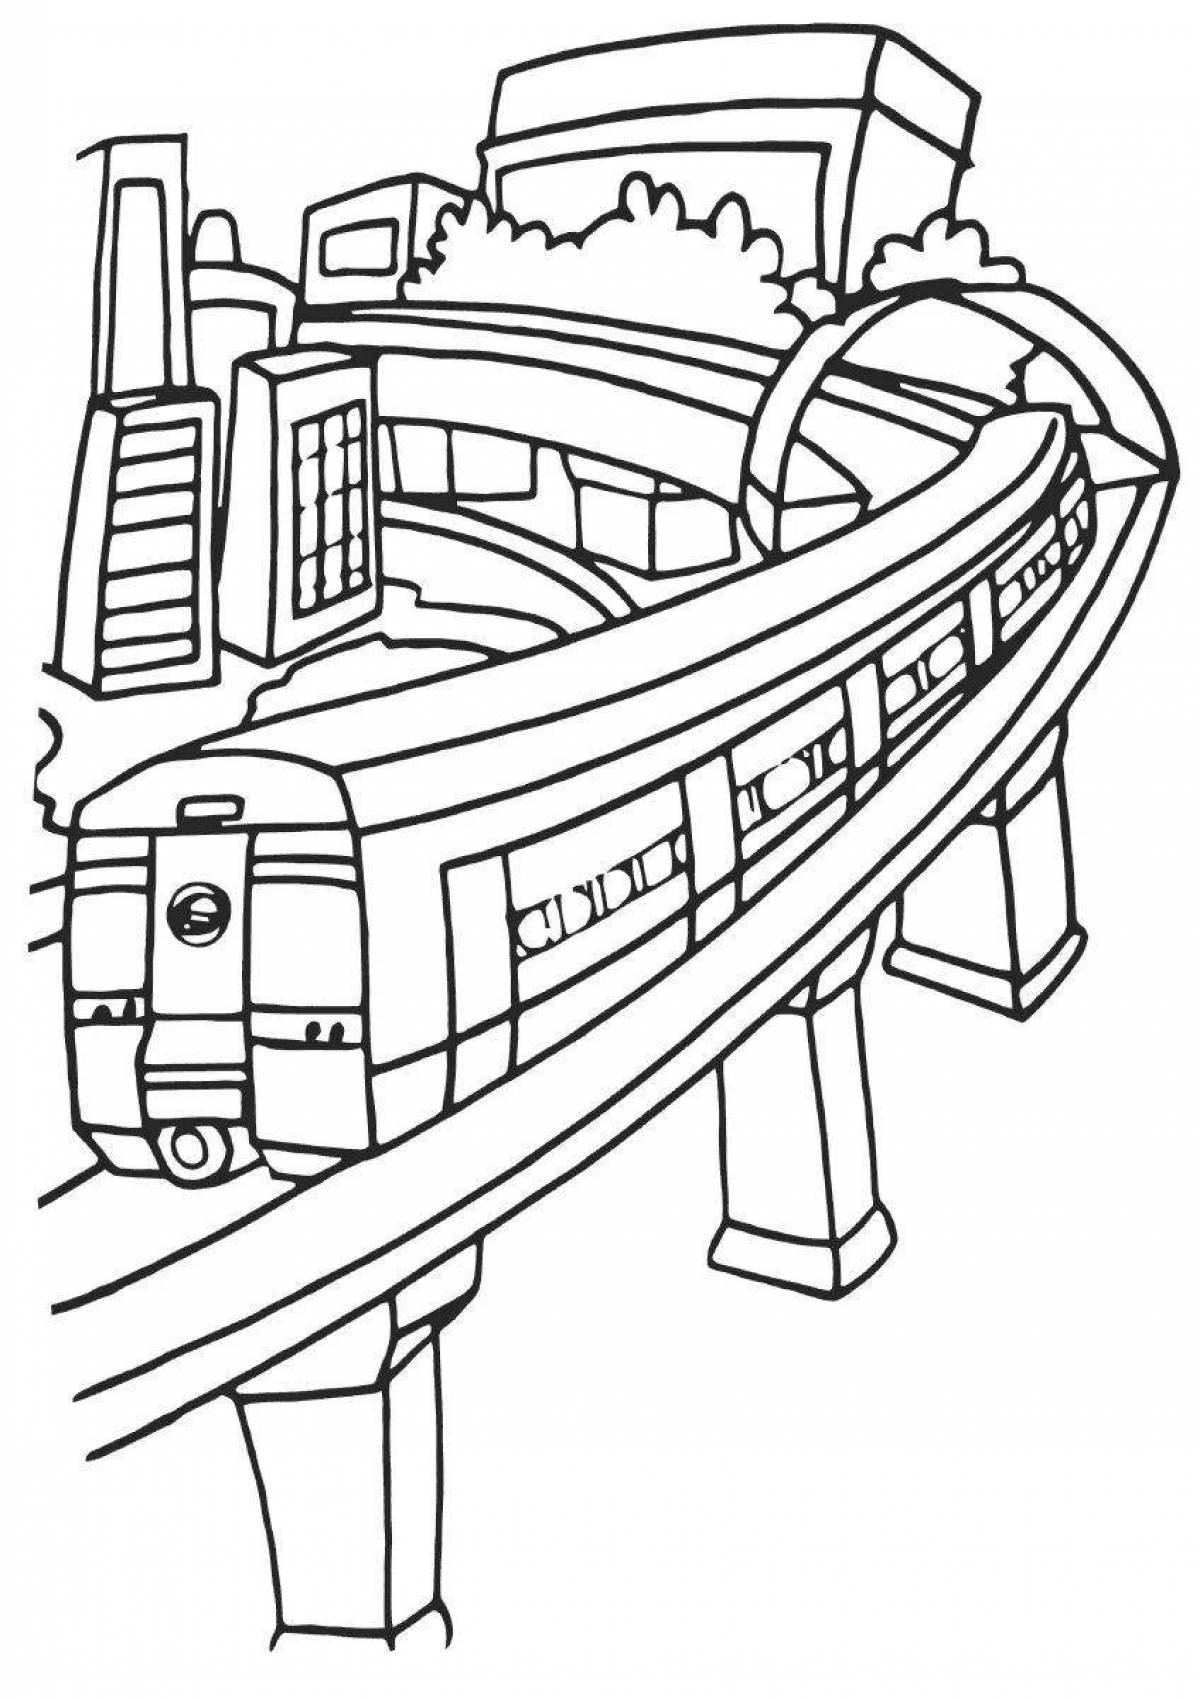 Amazing subway coloring page